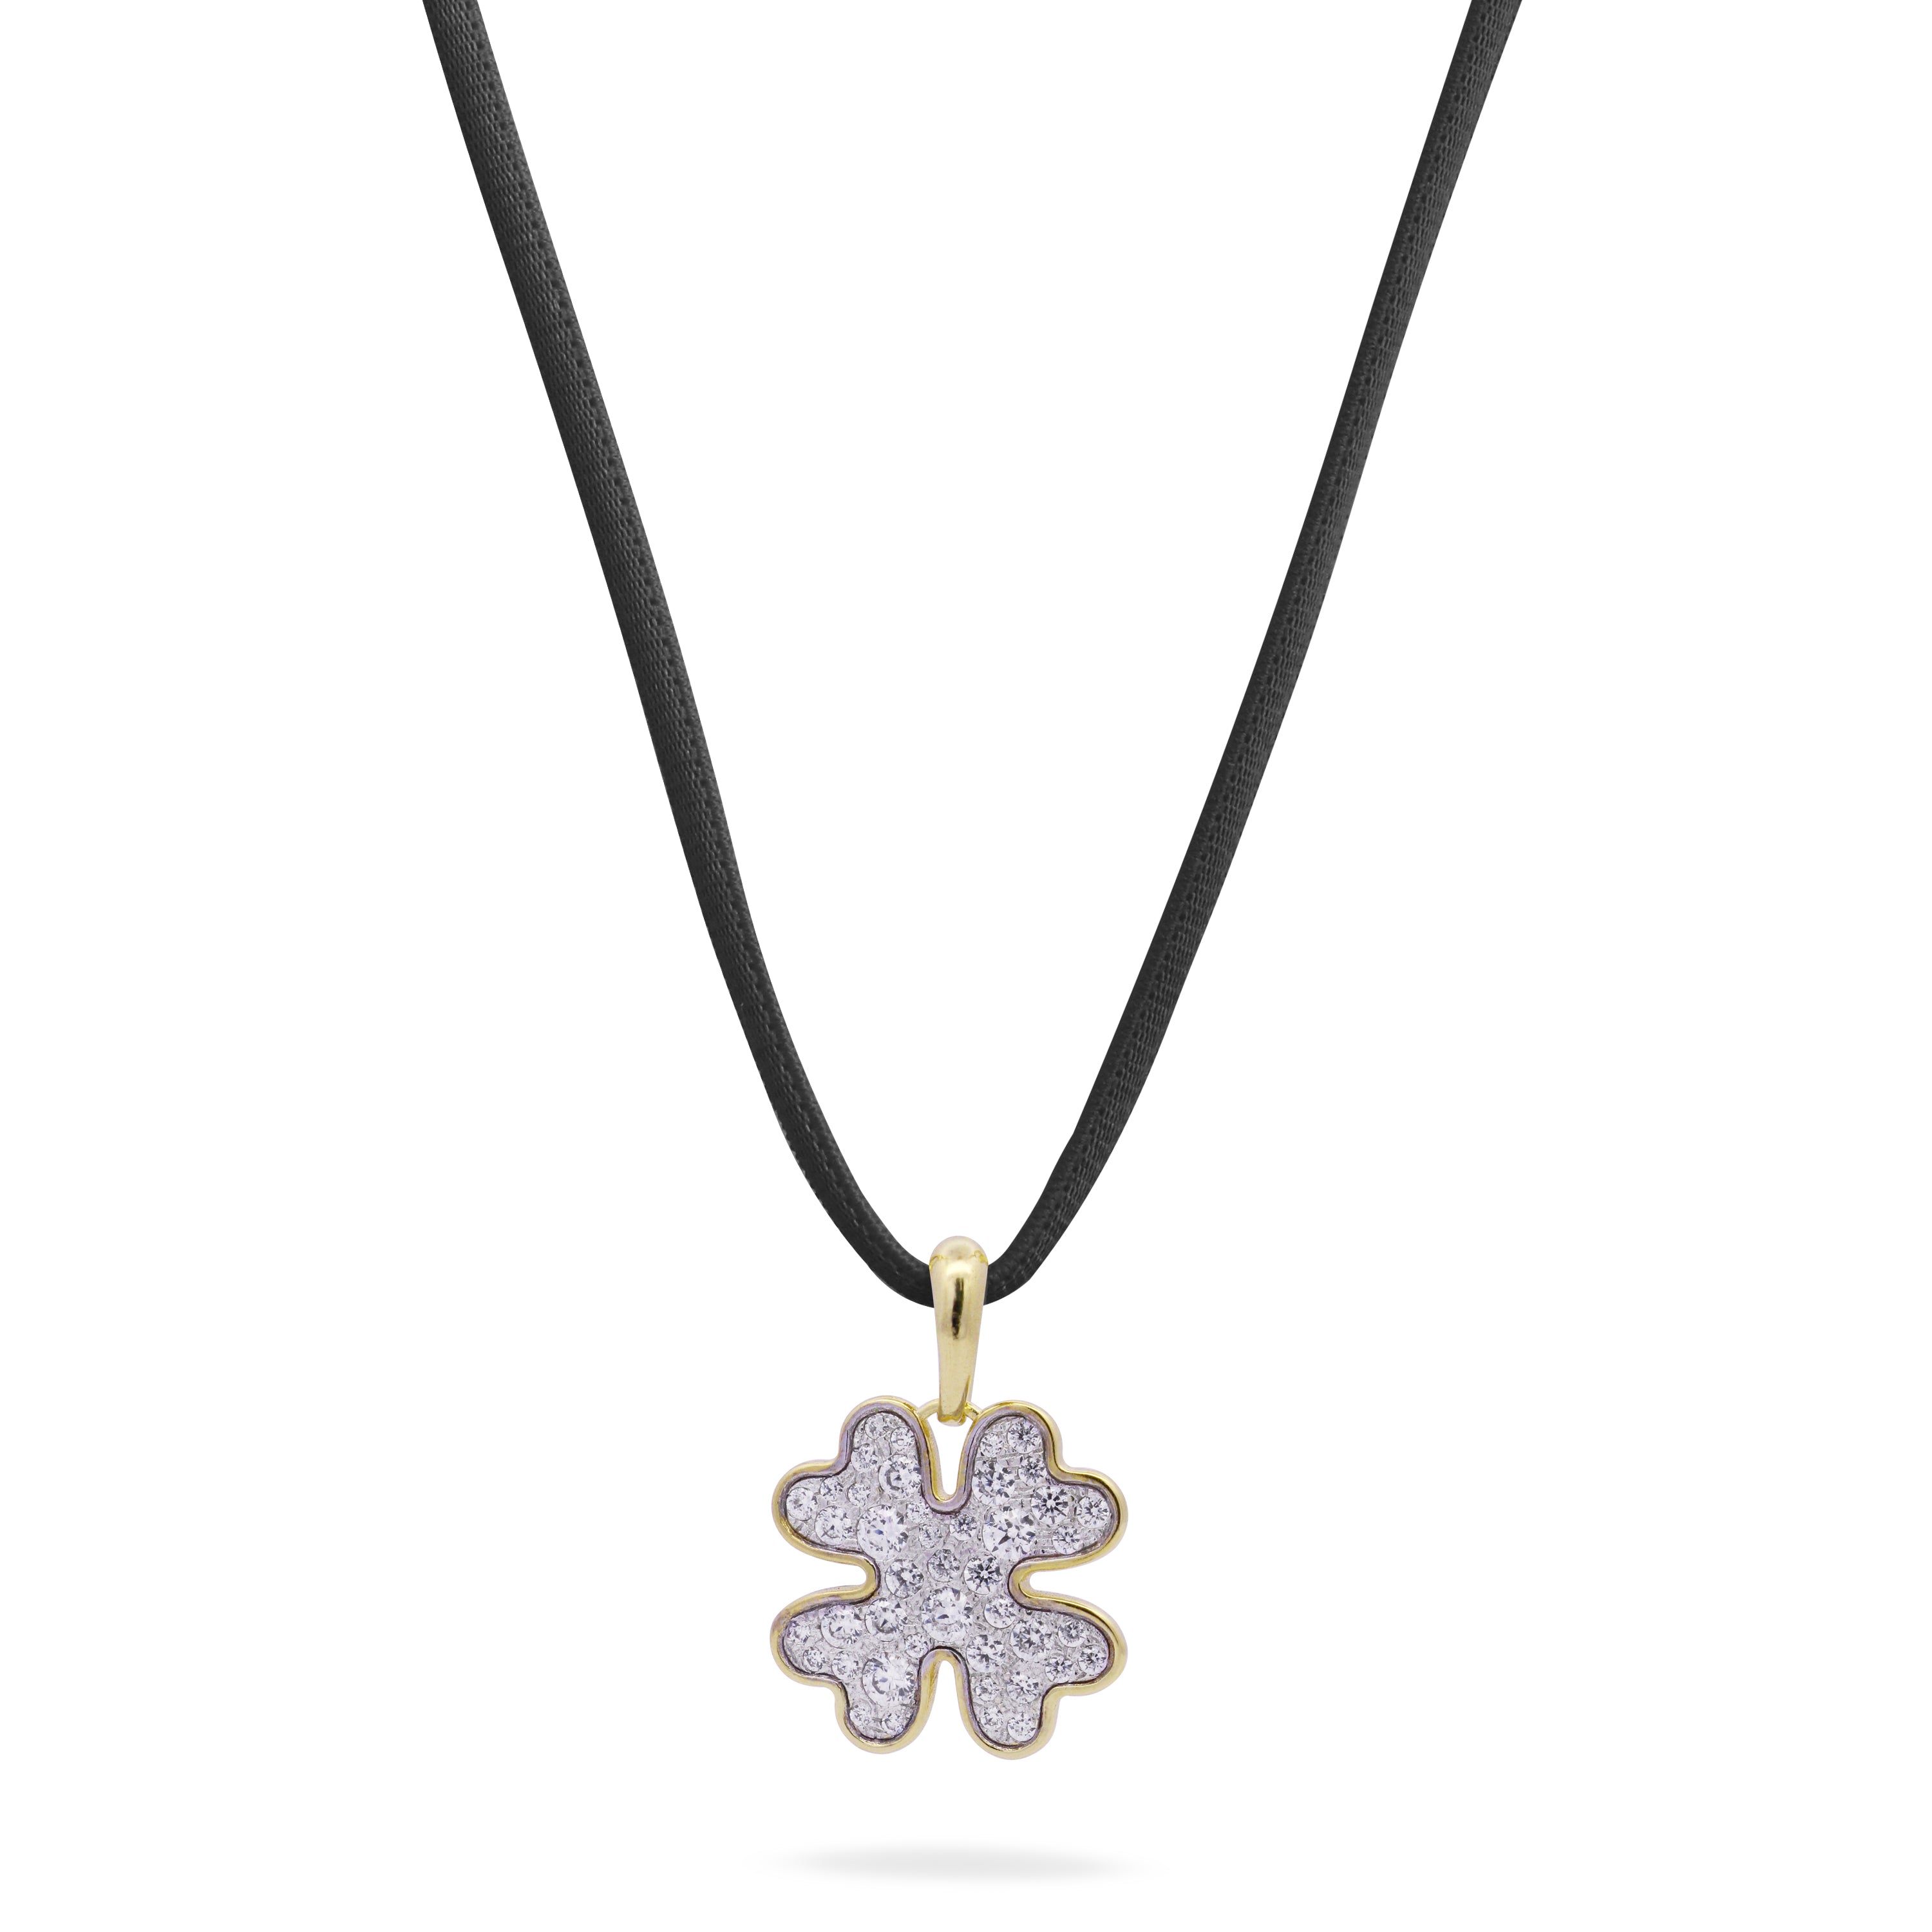 Oversized pave four-leaf clover pendant with black choker - STARDUST TEN